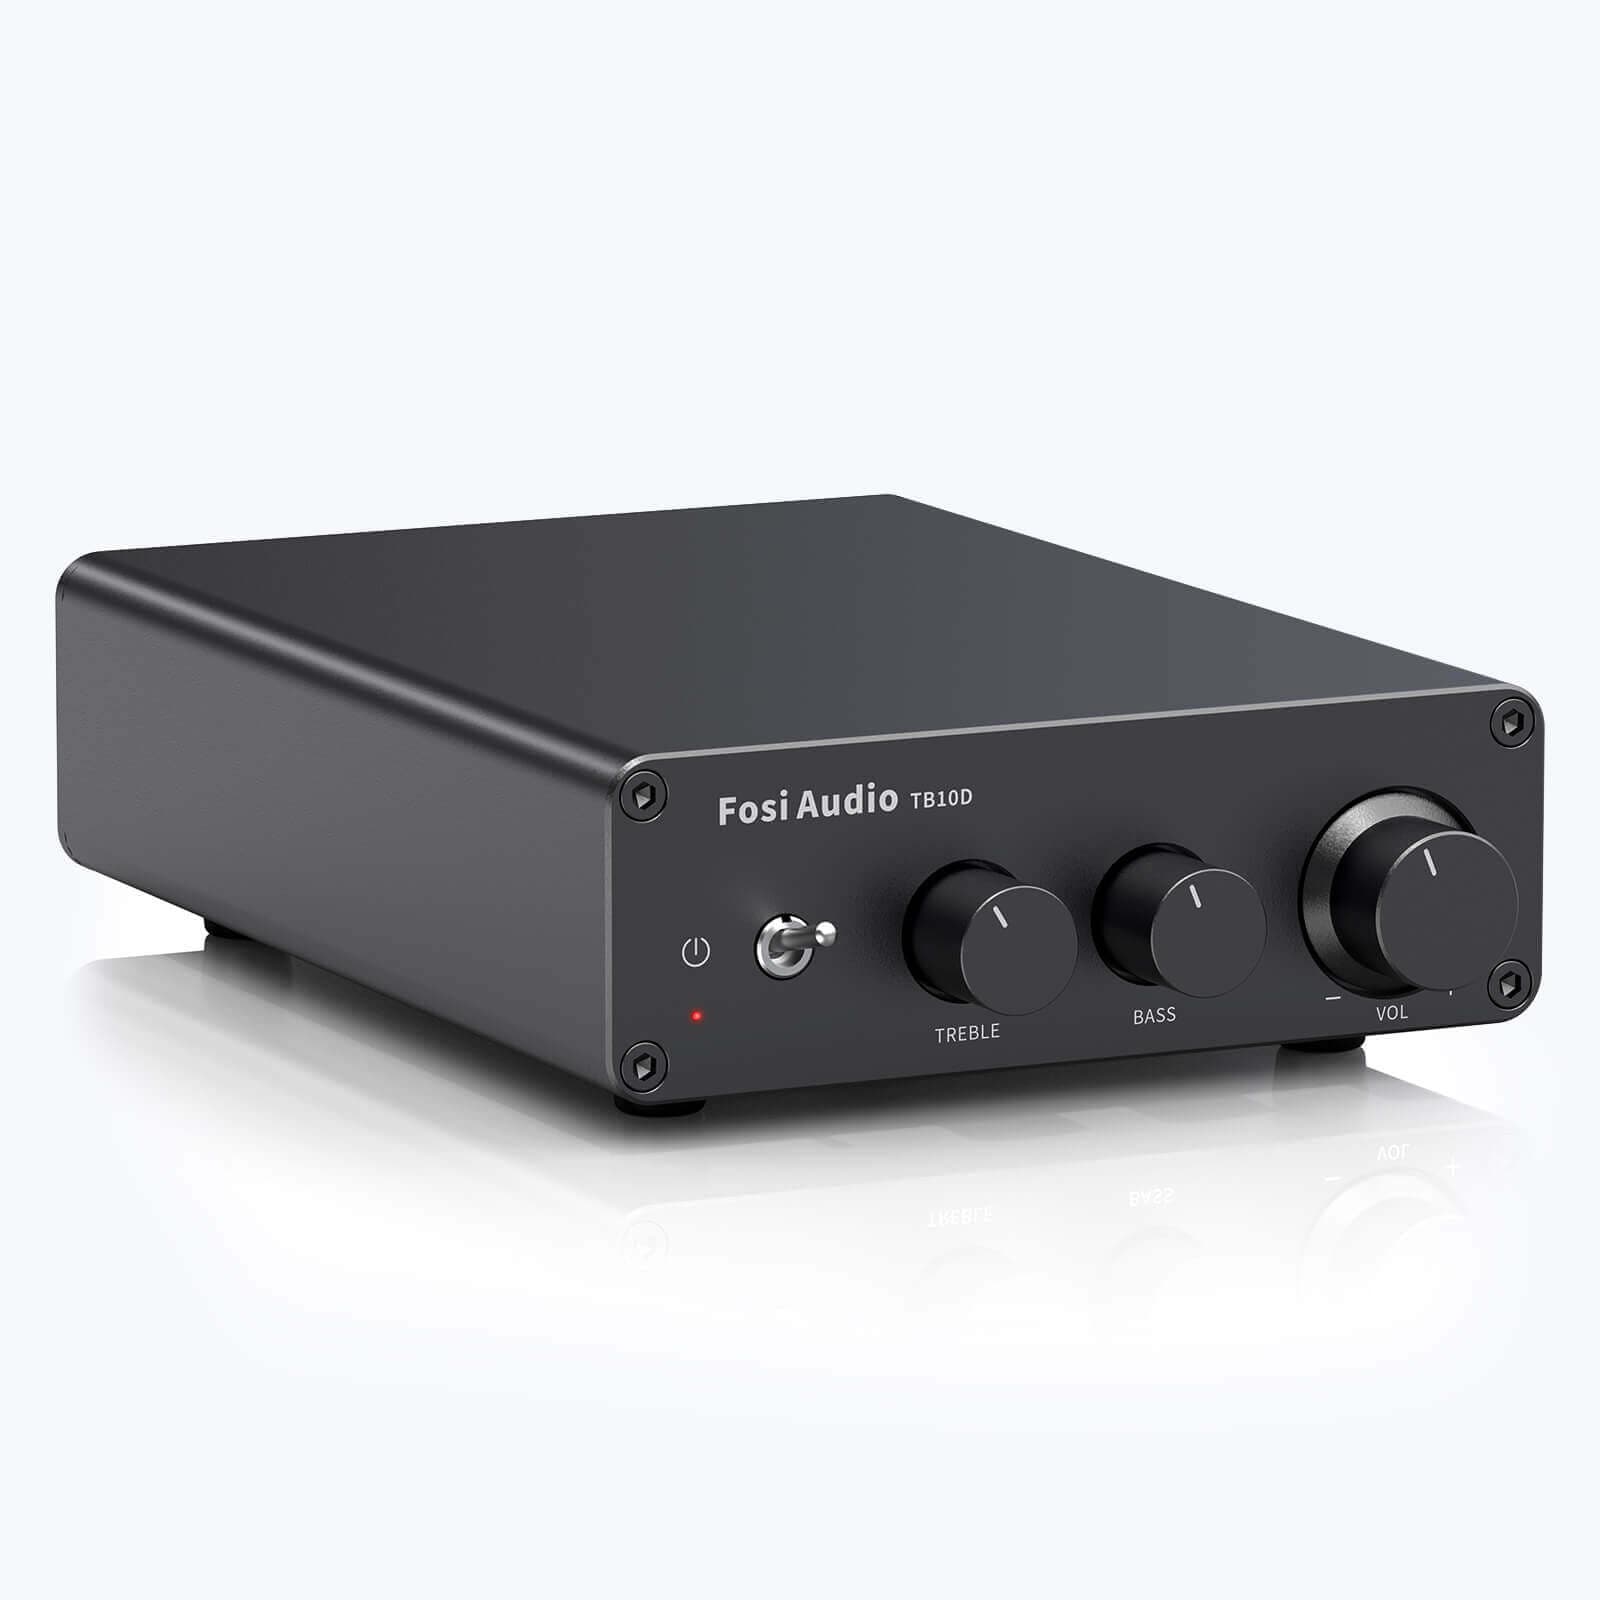 Fosi Audio TB10D TPA3255 Power Amplifier 300Wx2 HiFi Digital Stereo Audio Amp 2.0 Channel Amplifier with Bass and Treble Control